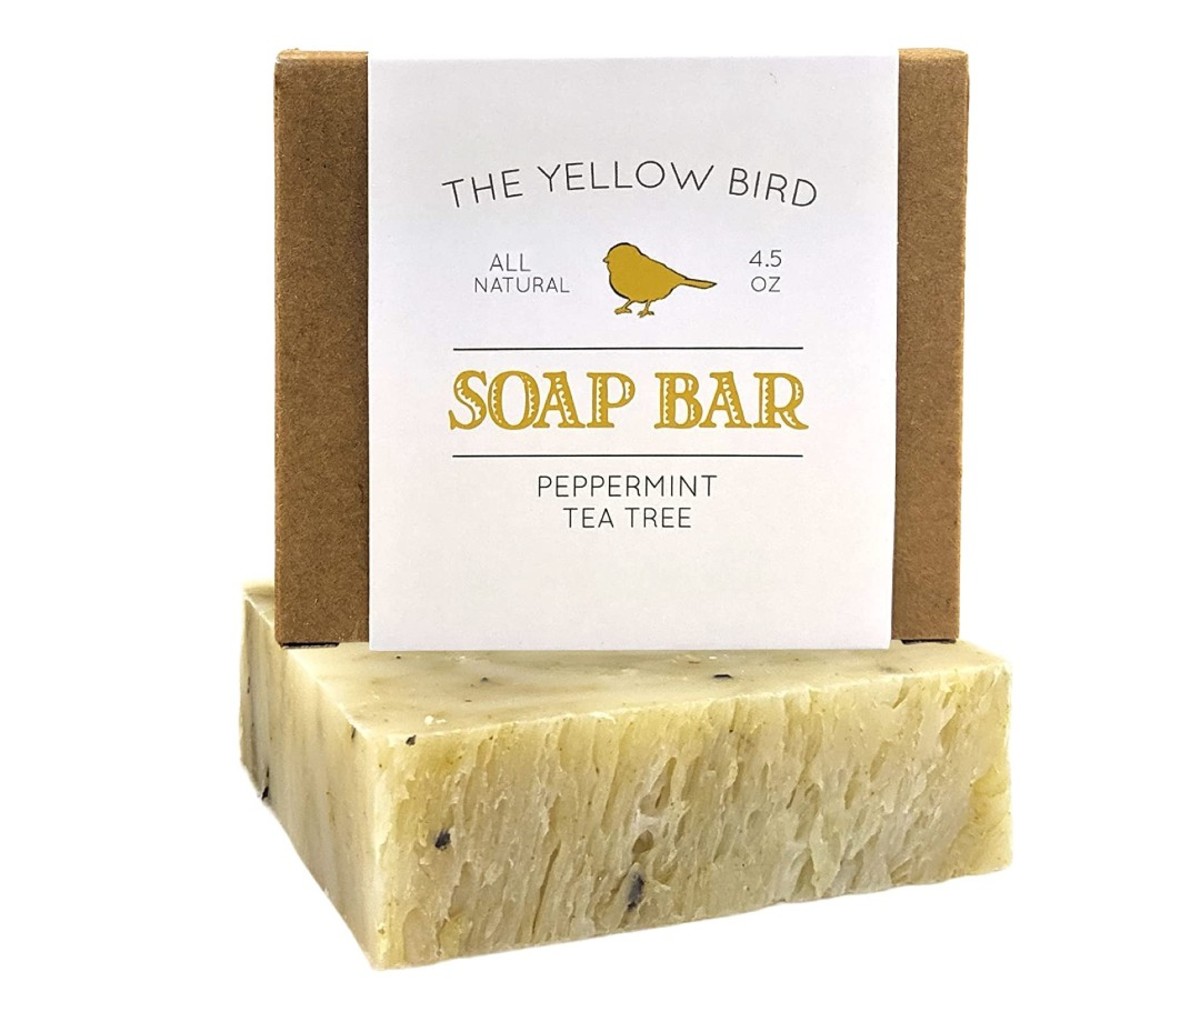 The Yellow Bird Peppermint and Tea Tree Soap Bar